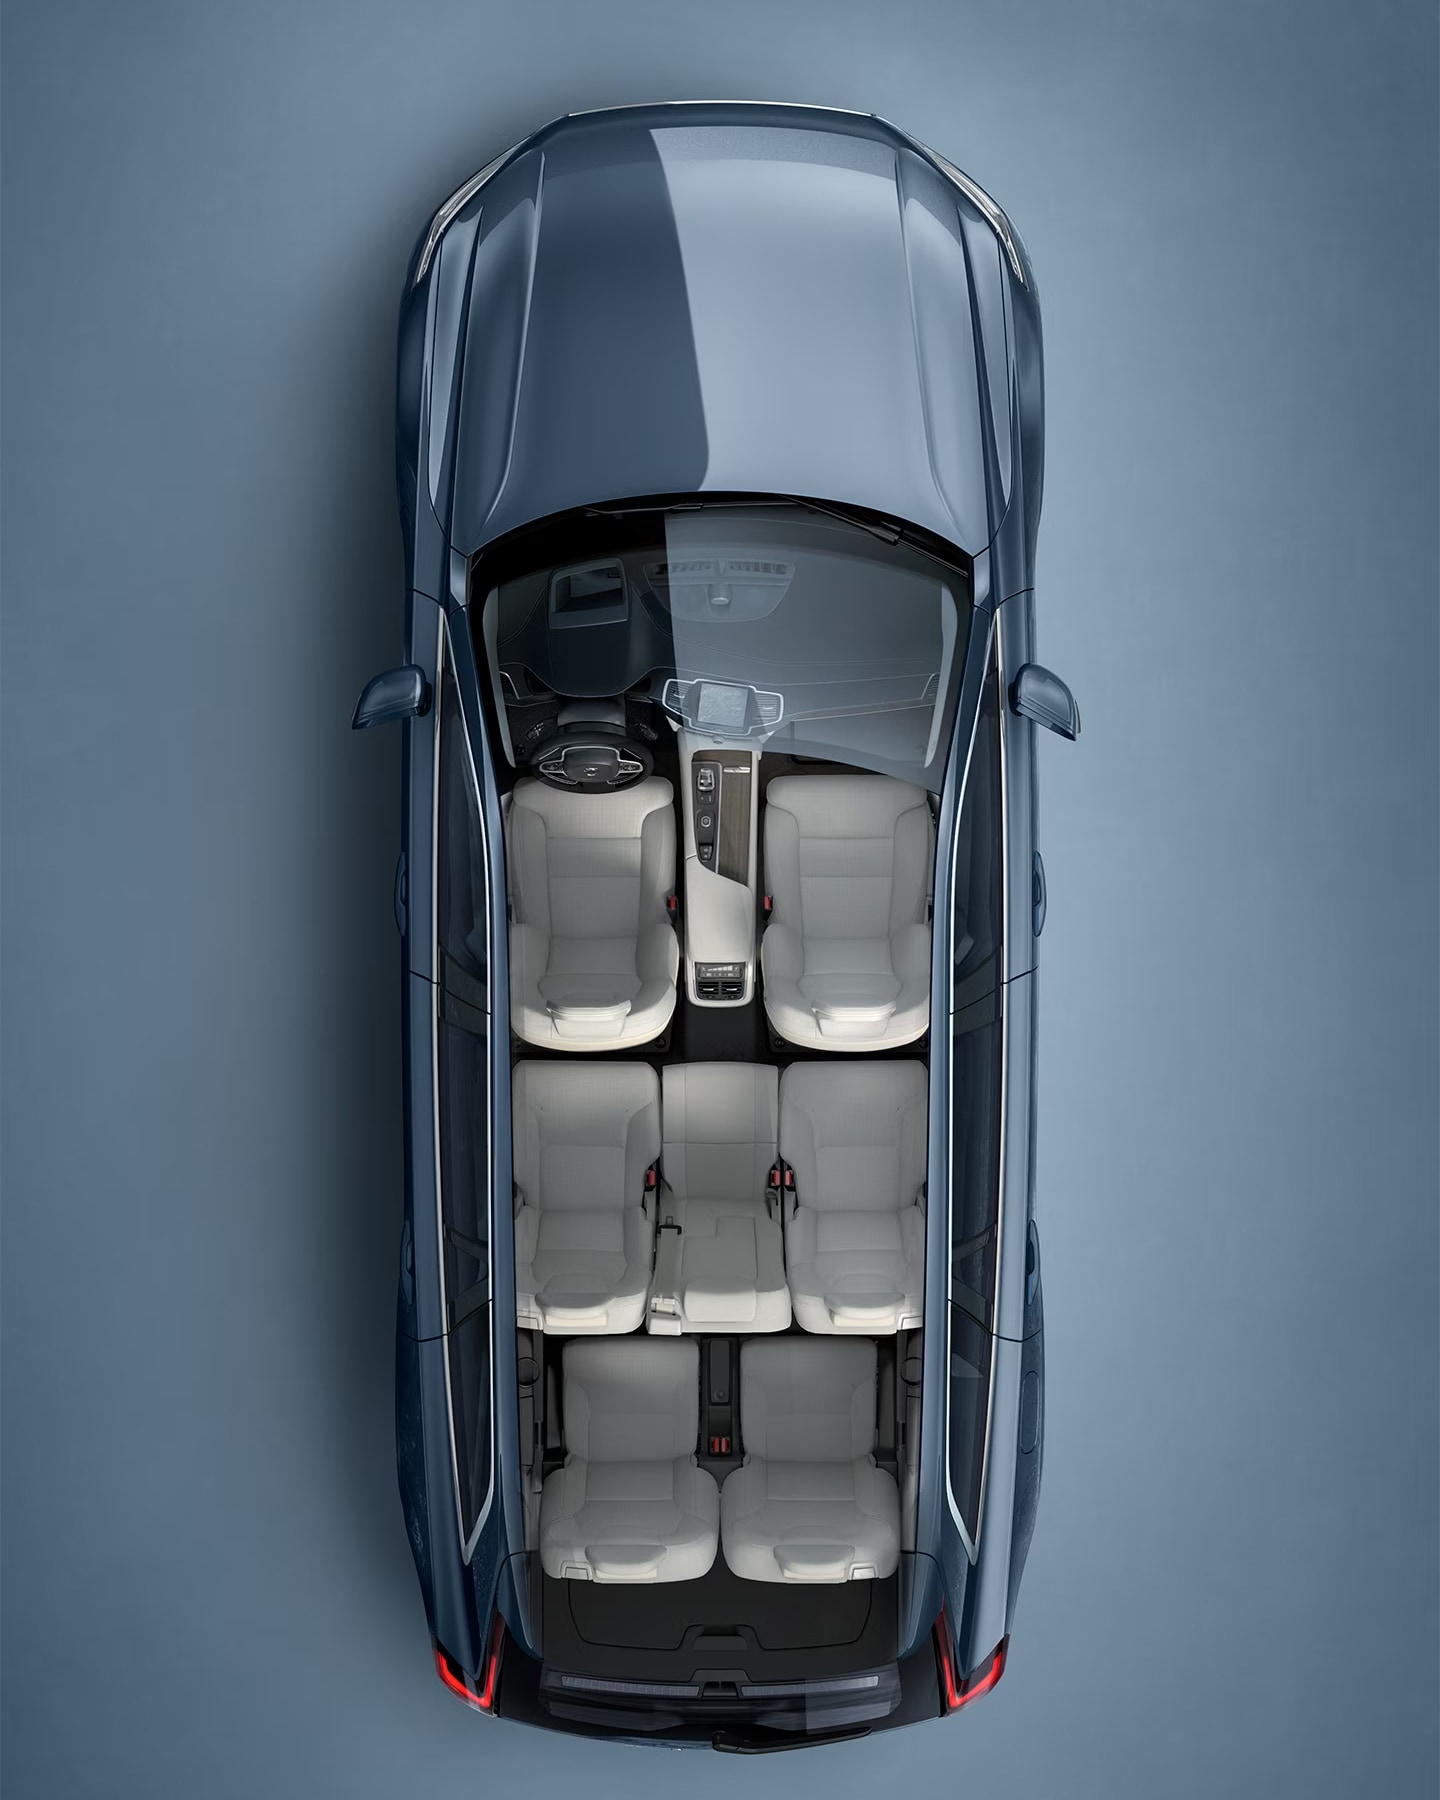 "A white Volvo XC90 SUV seen from directly above with interior visible.